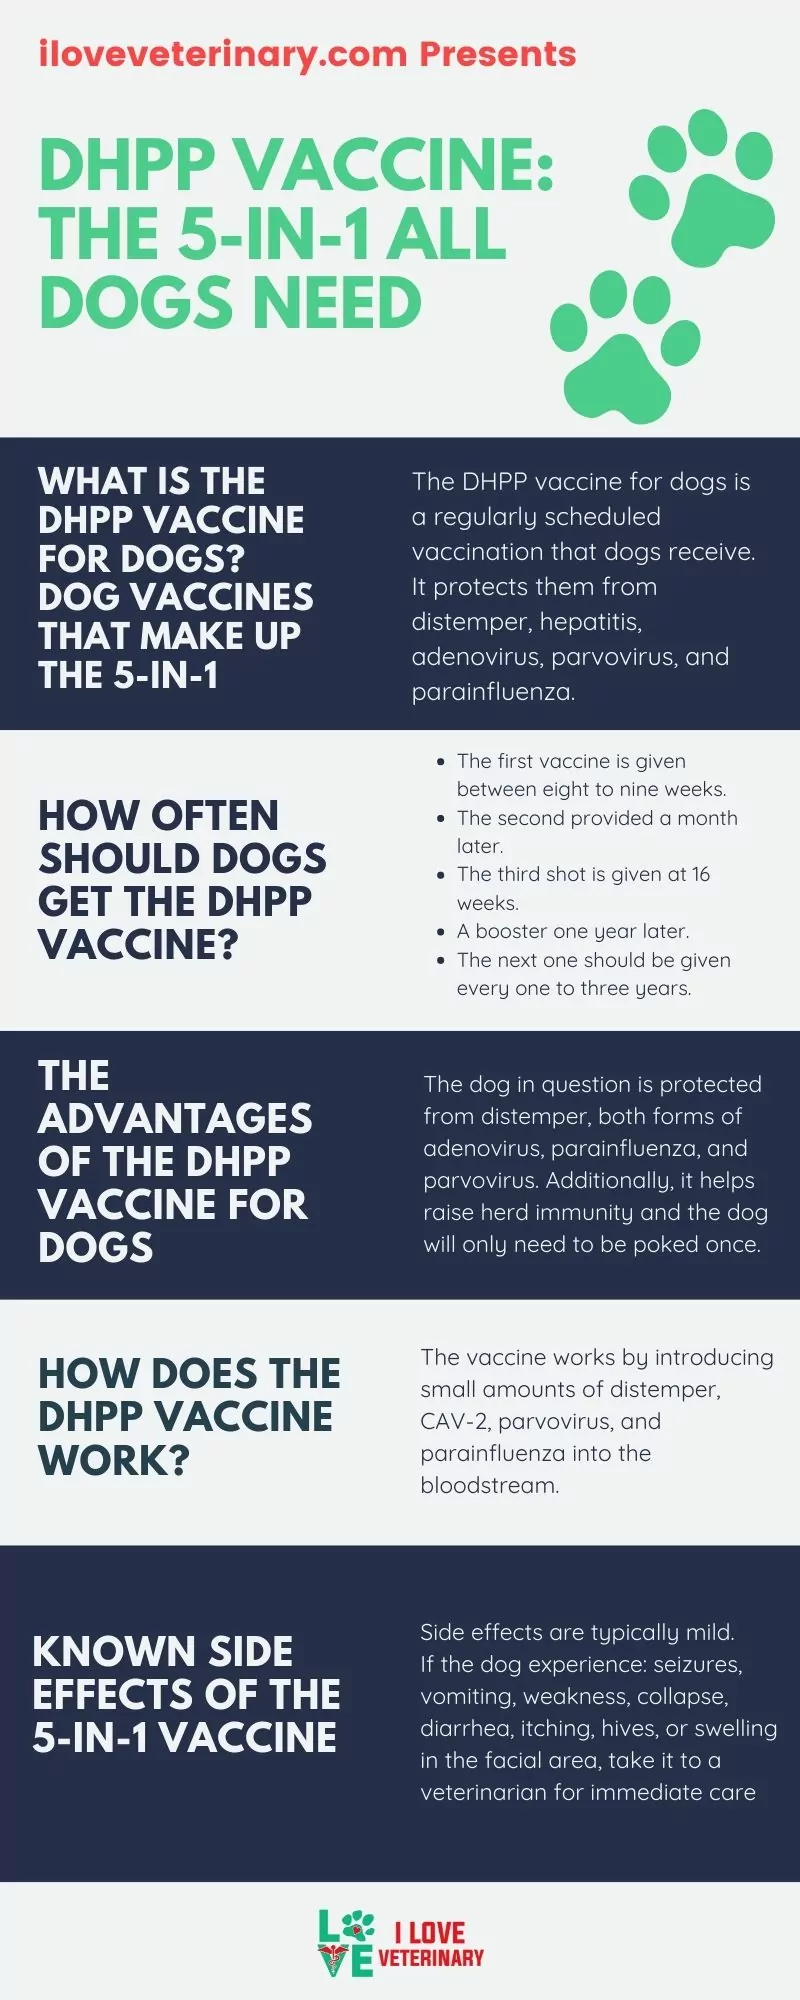 DHPP Vaccine: The 5-in-1 All Dogs Need